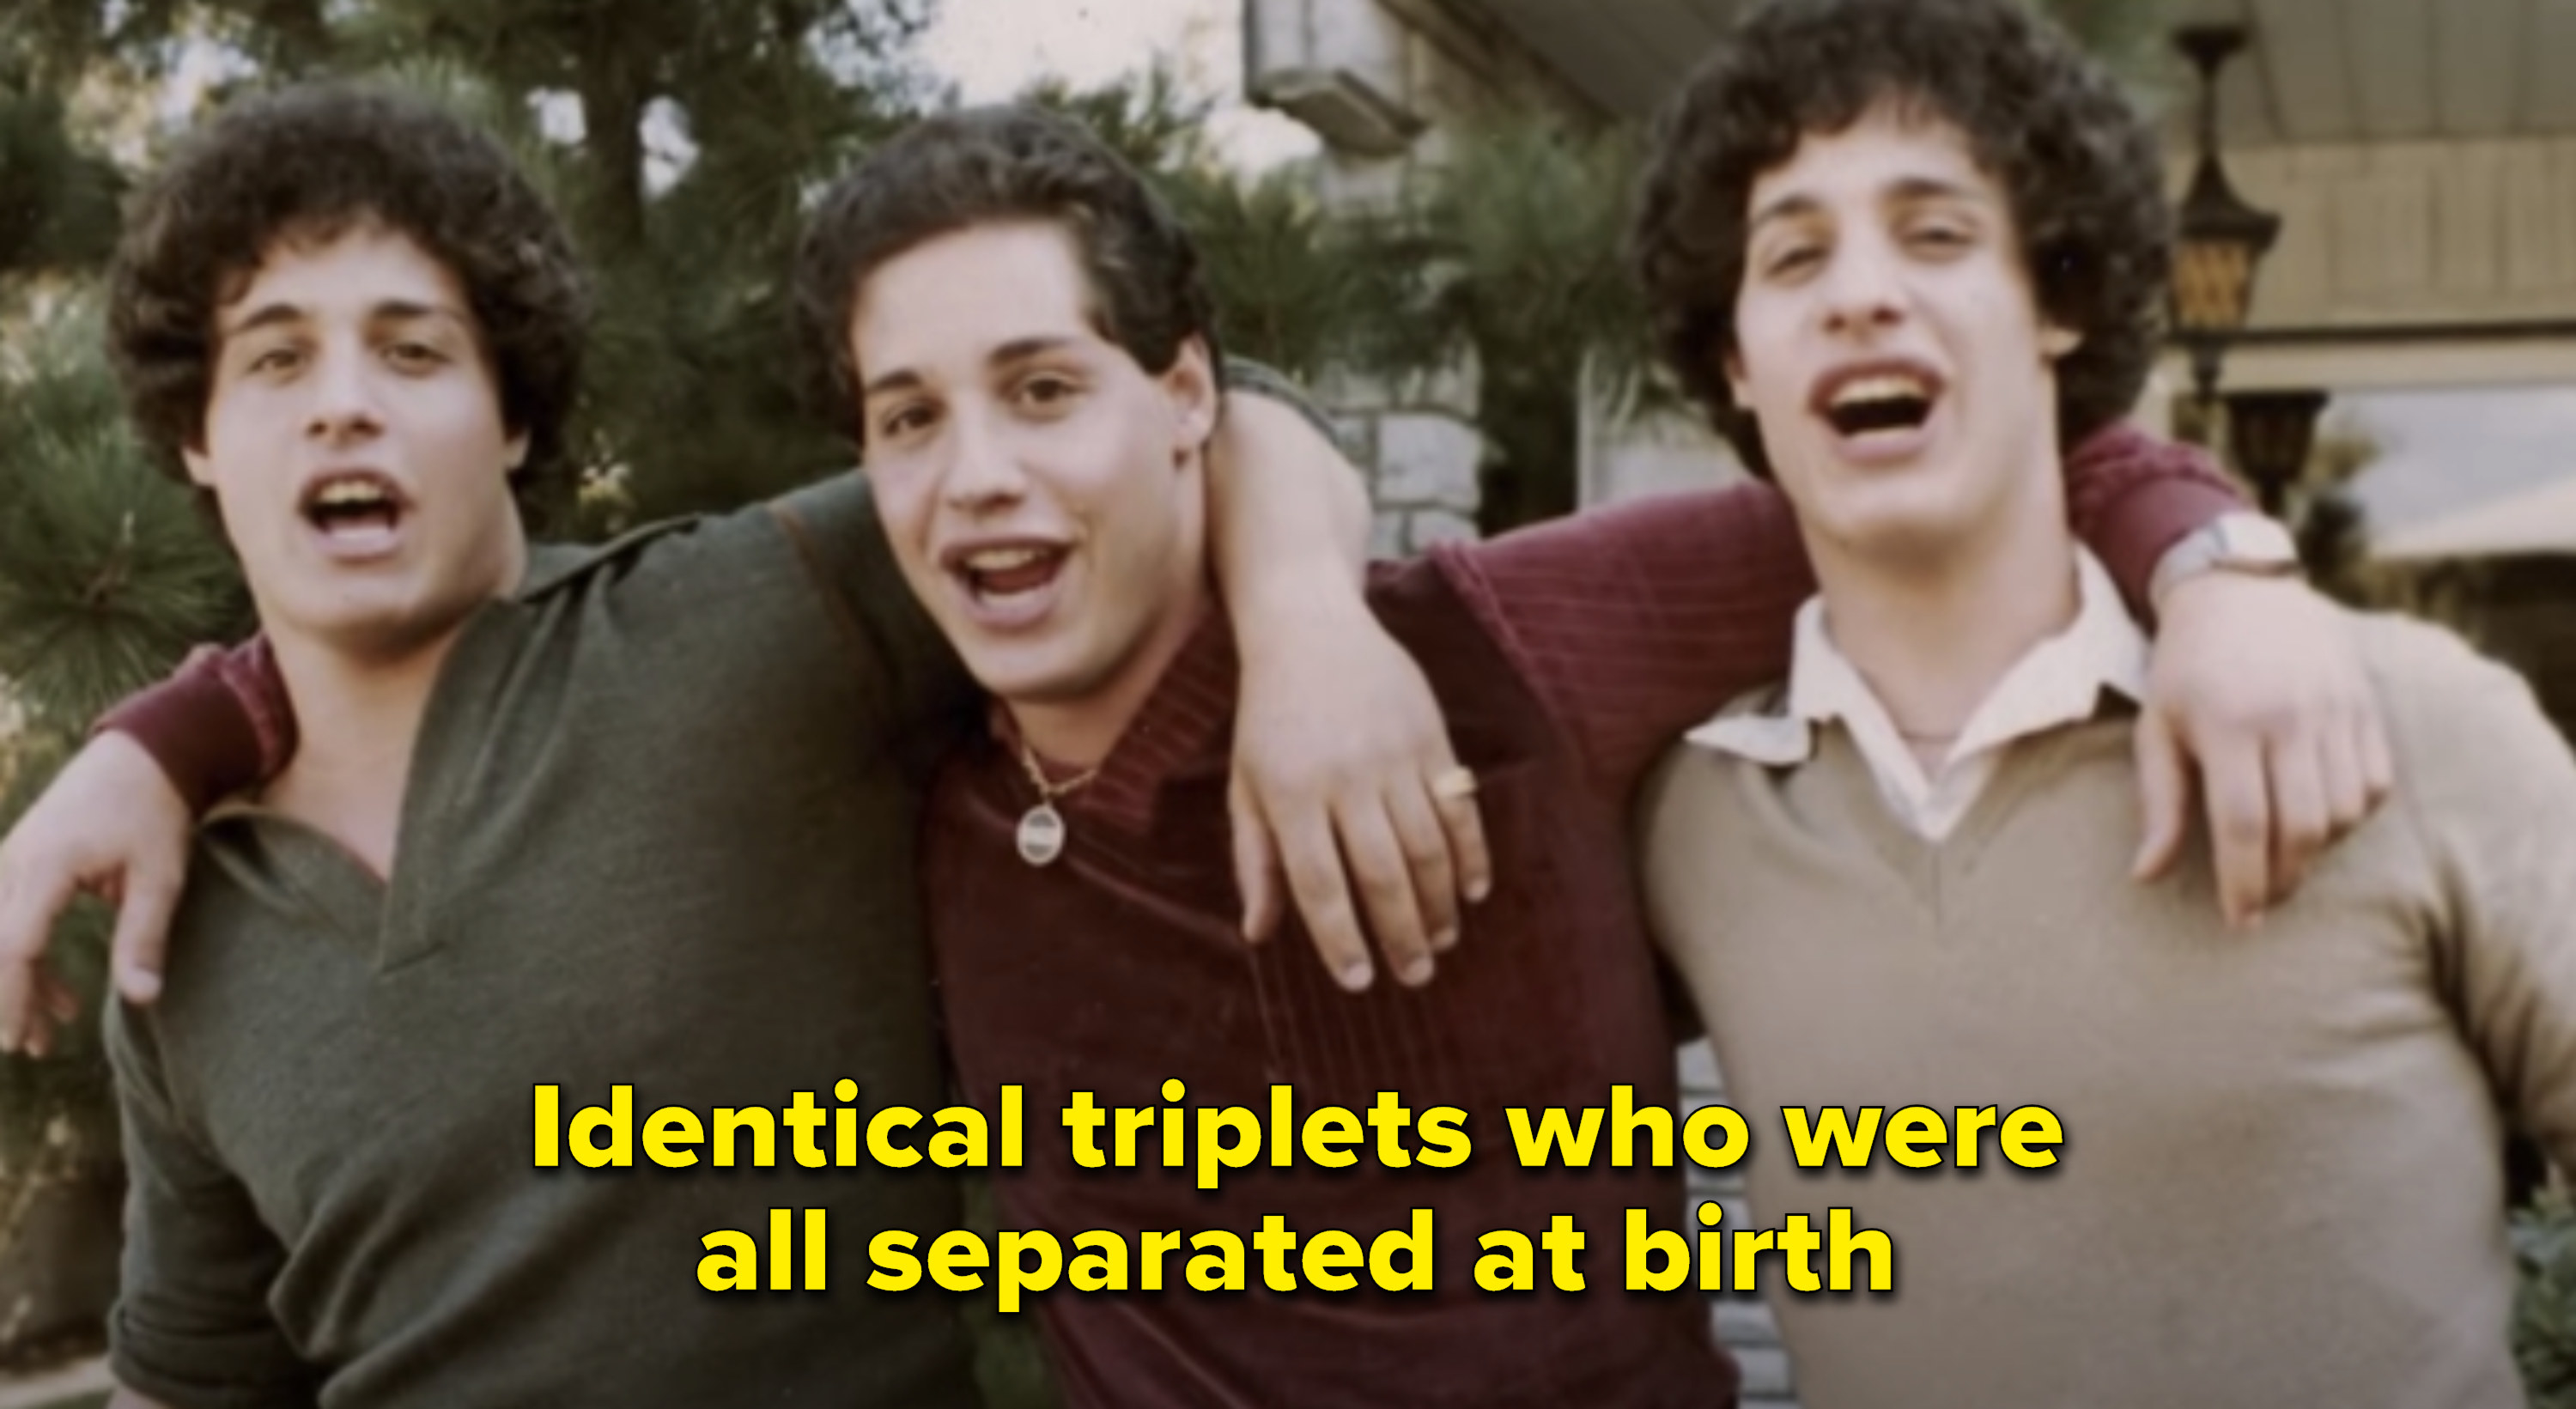 Bobby Shafran and his two brothers as late-teens